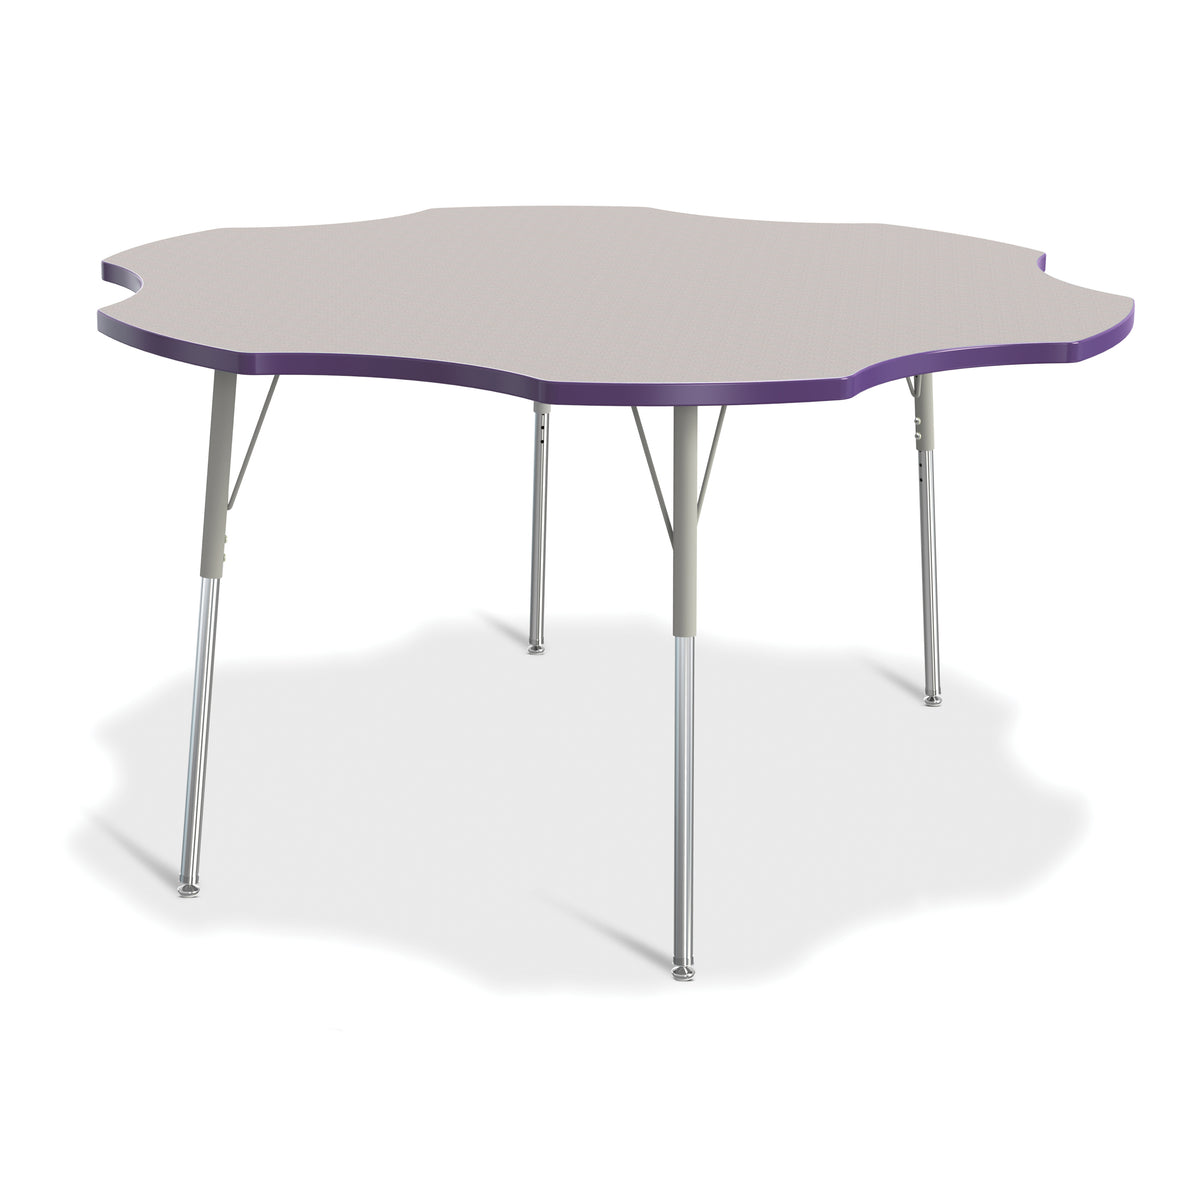 6458JCA004, Berries Six Leaf Activity Table - 60", A-height - Freckled Gray/Purple/Gray